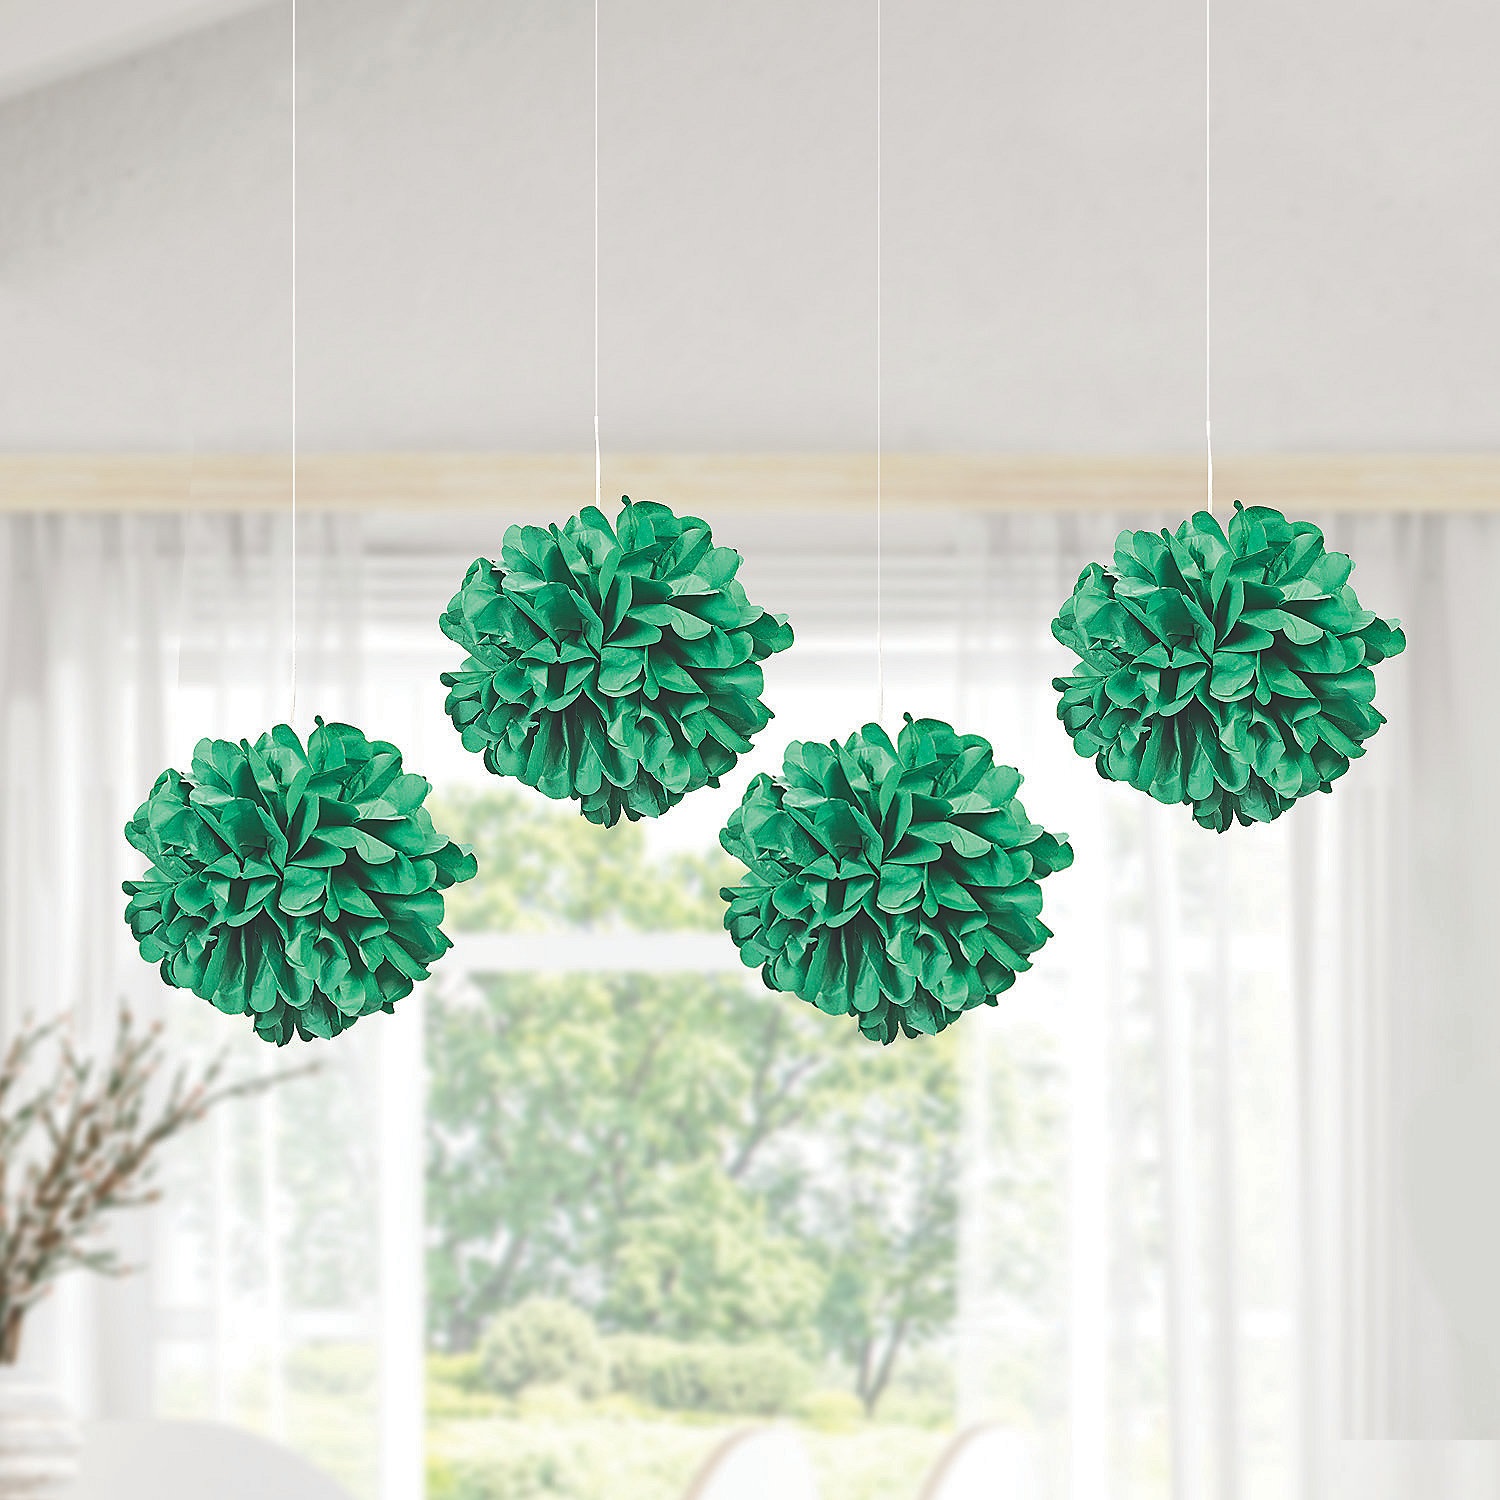 15-green-hanging-tissue-paper-pom-pom-decorations-6-pc-_13700811-a02